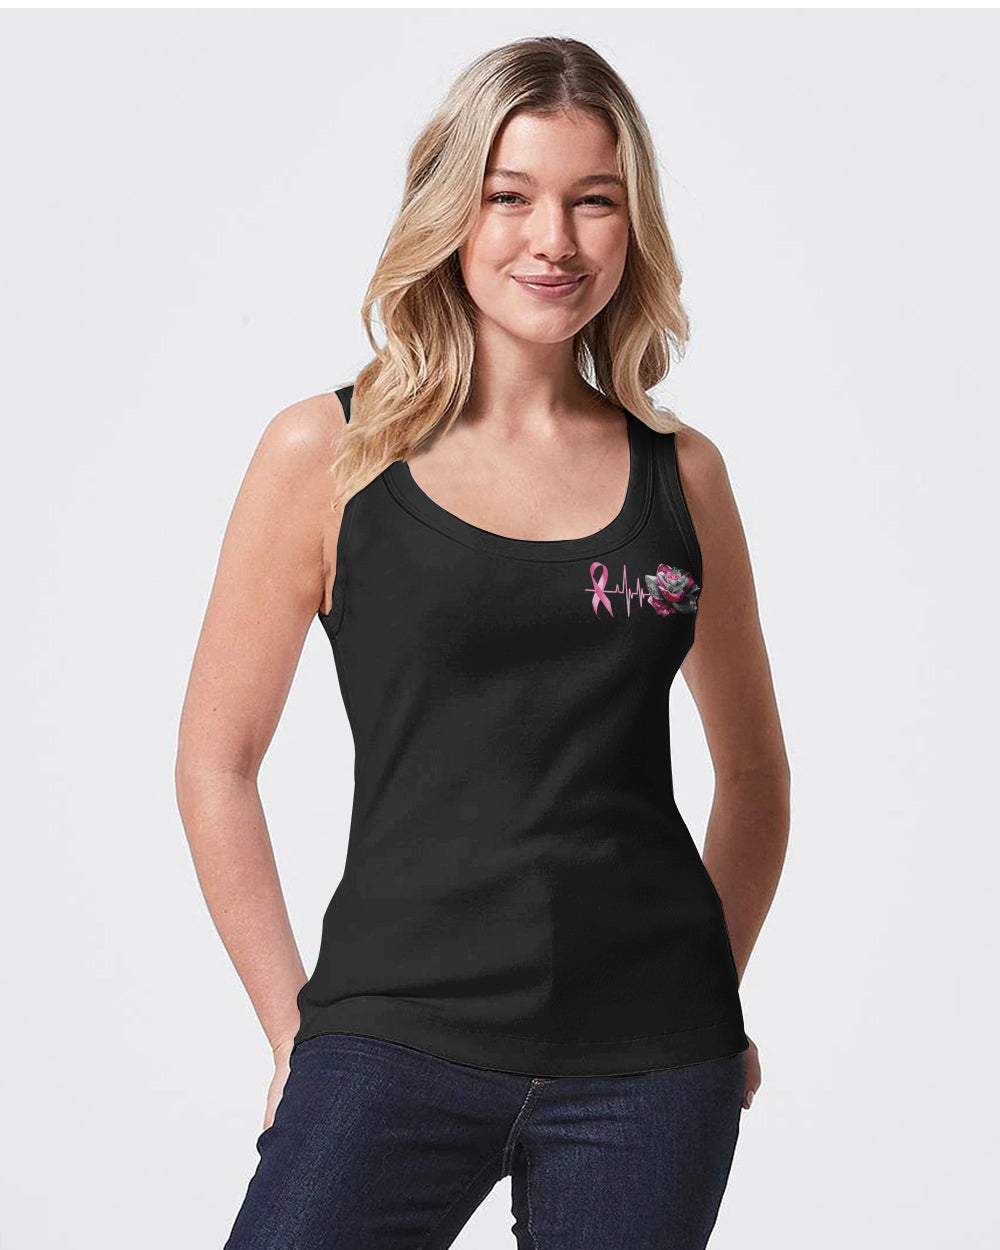 I Survived Because The Fire Inside Of Me Rose Cross Women's Breast Cancer Awareness Tanks